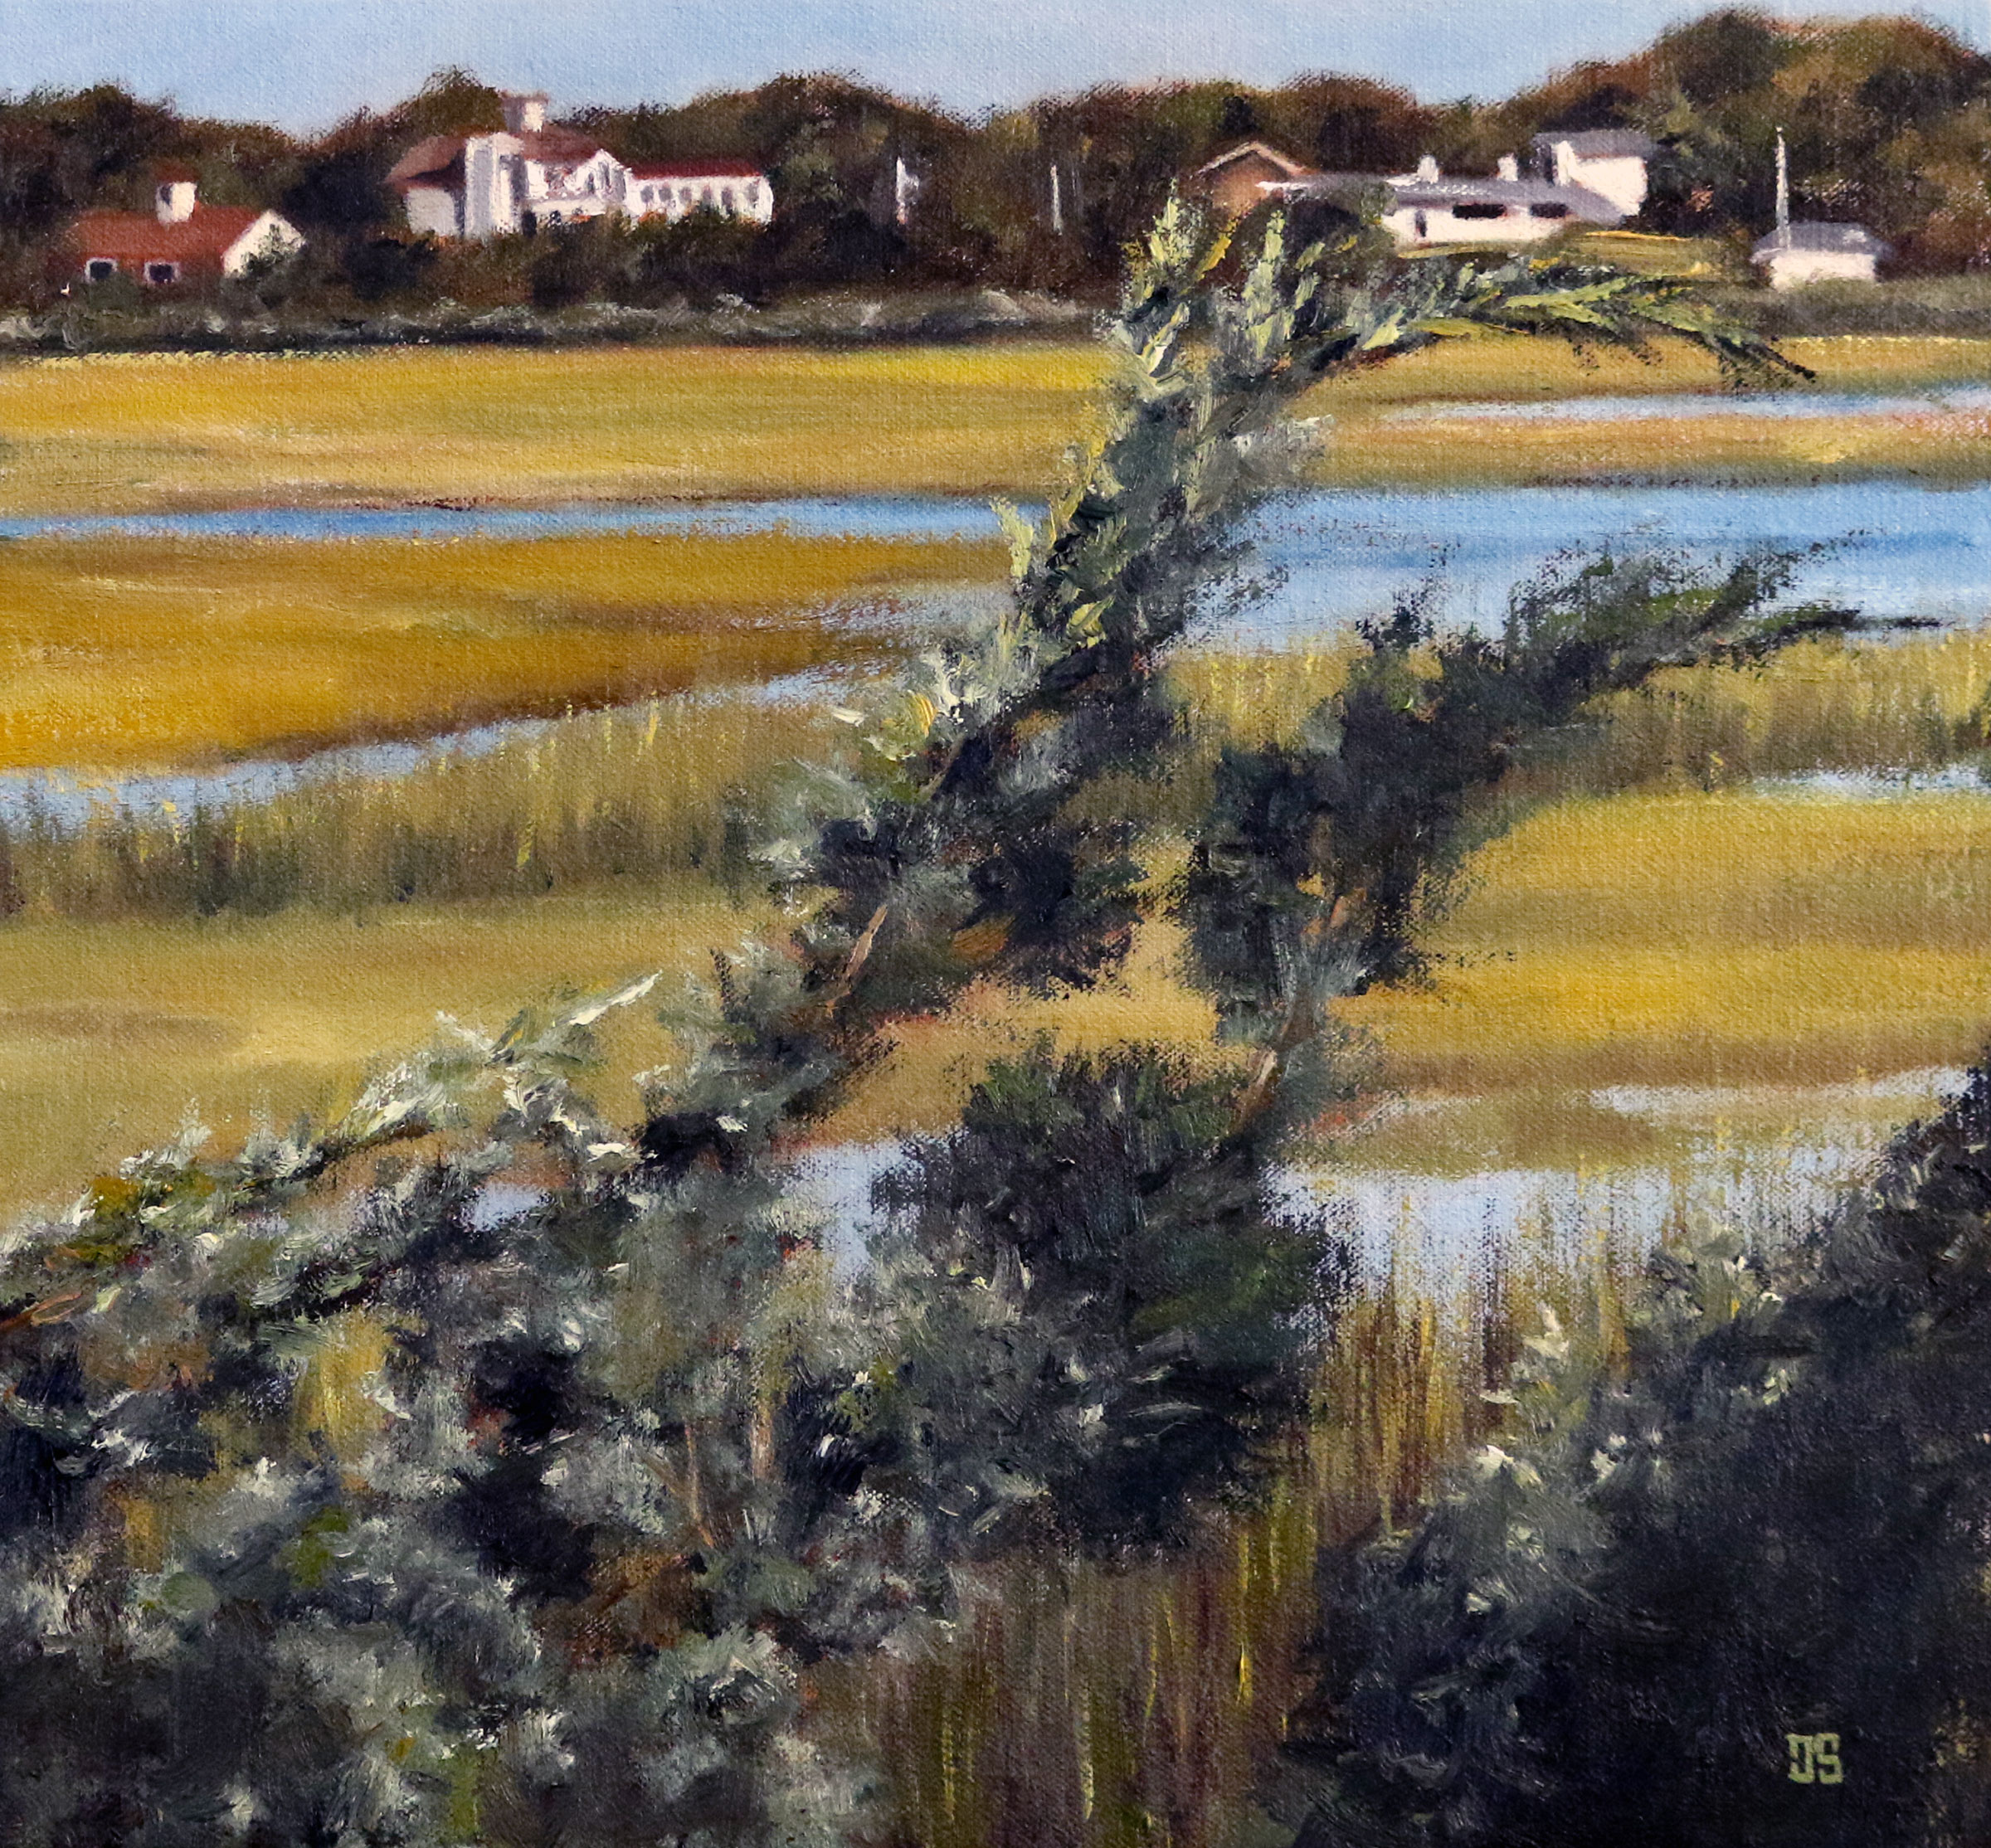 Oil painting "Bourne Marsh" by Jeffrey Dale Starr